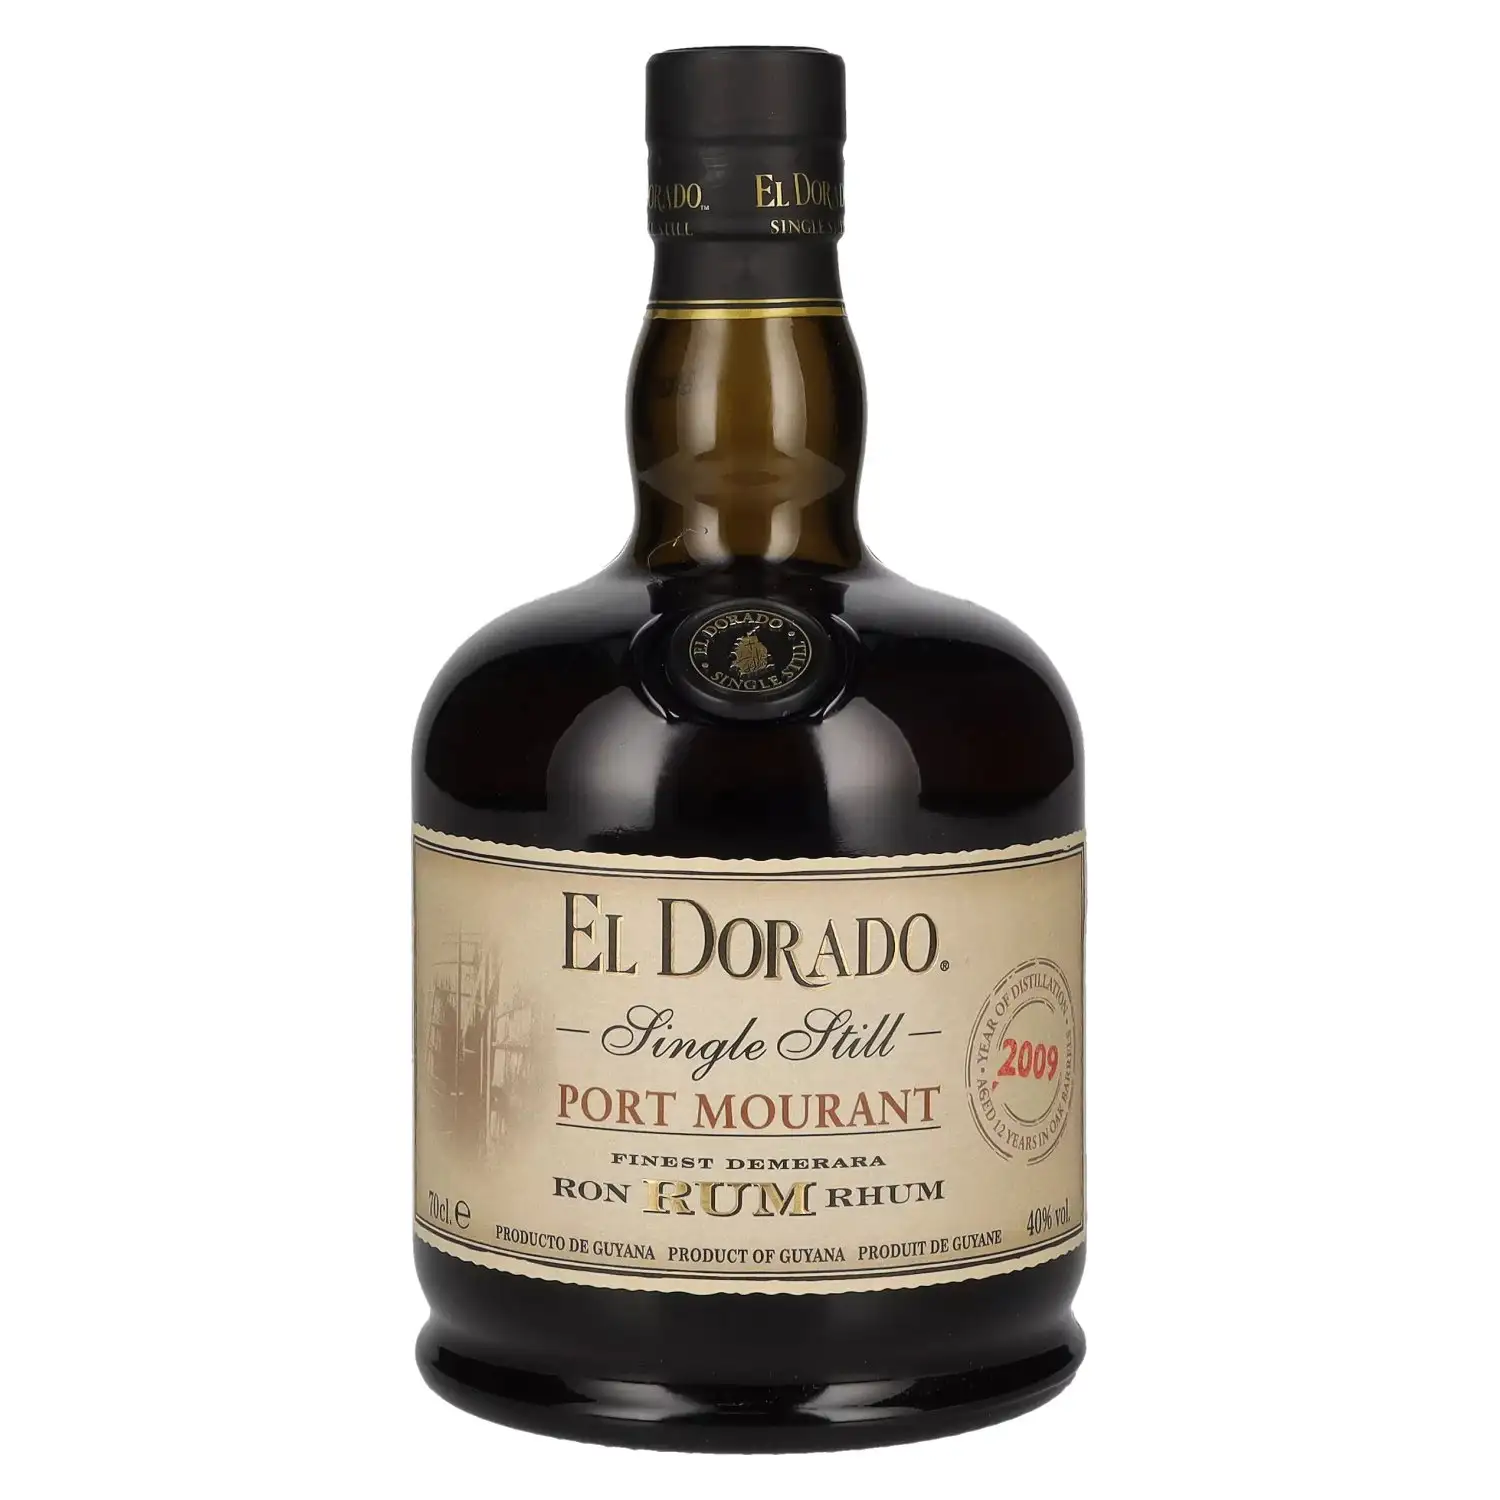 Image of the front of the bottle of the rum El Dorado Single Still Port Mourant